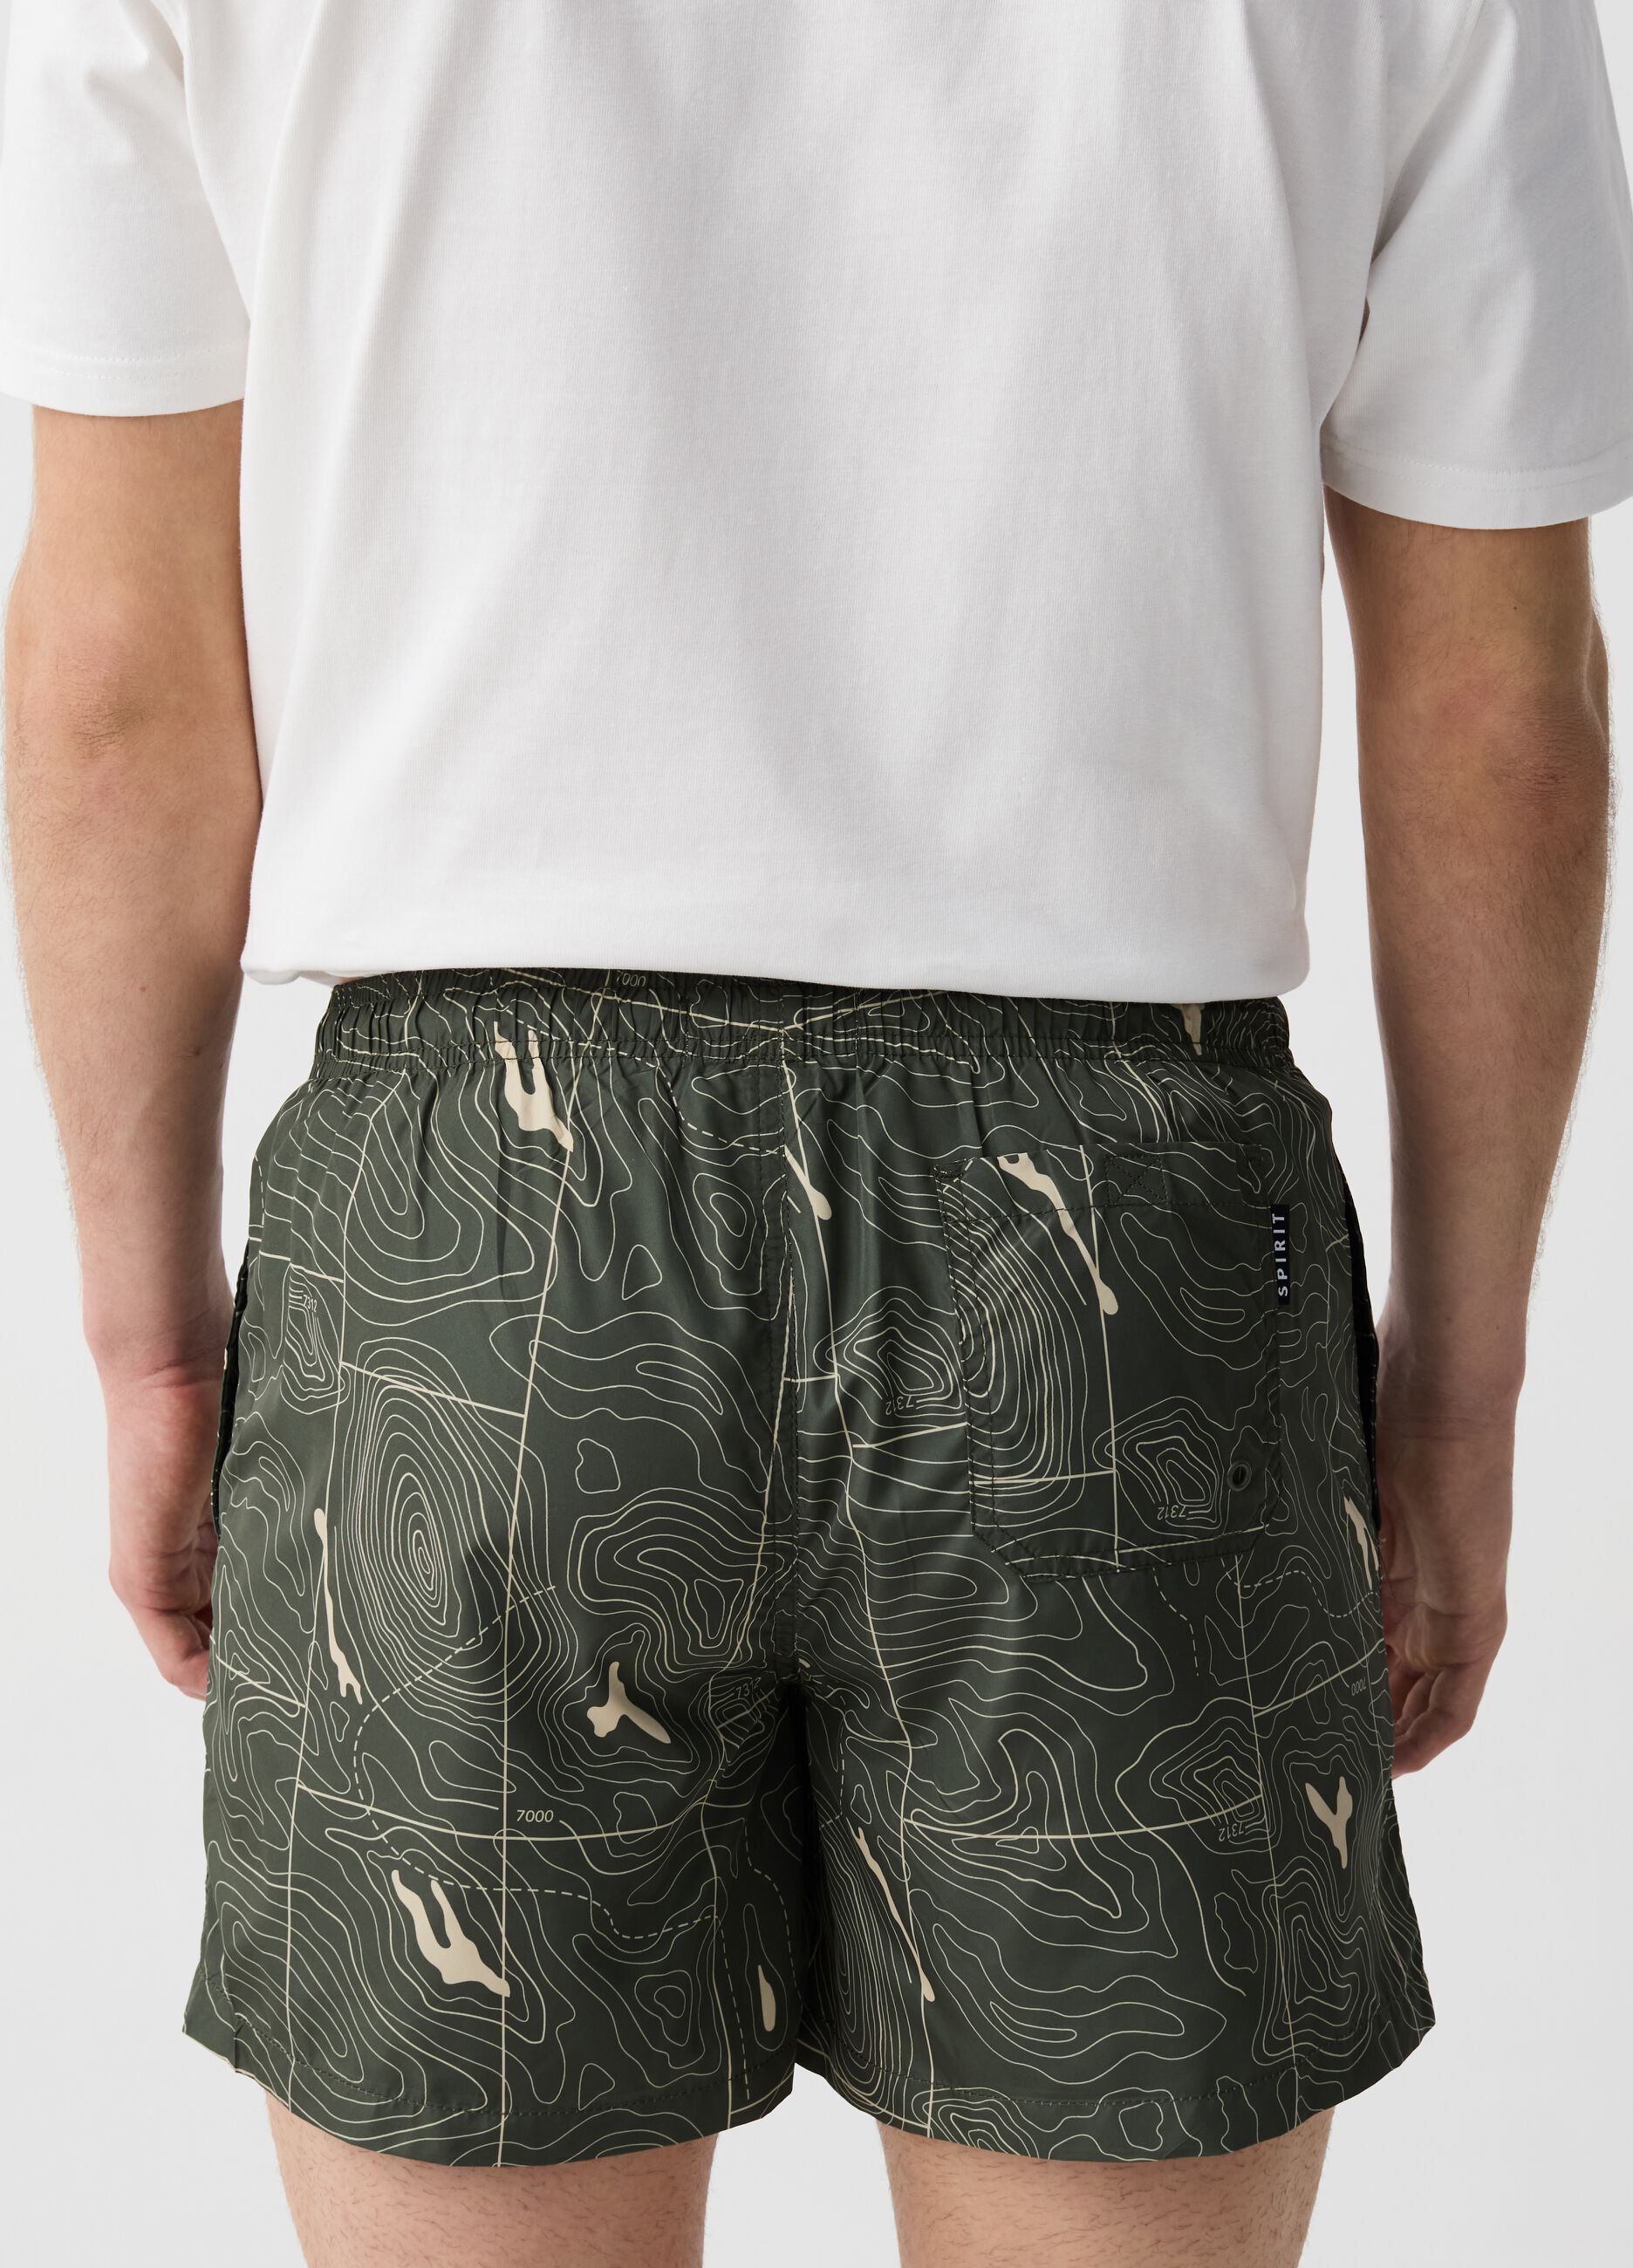 Cotton swimming shorts with patterned drawstring